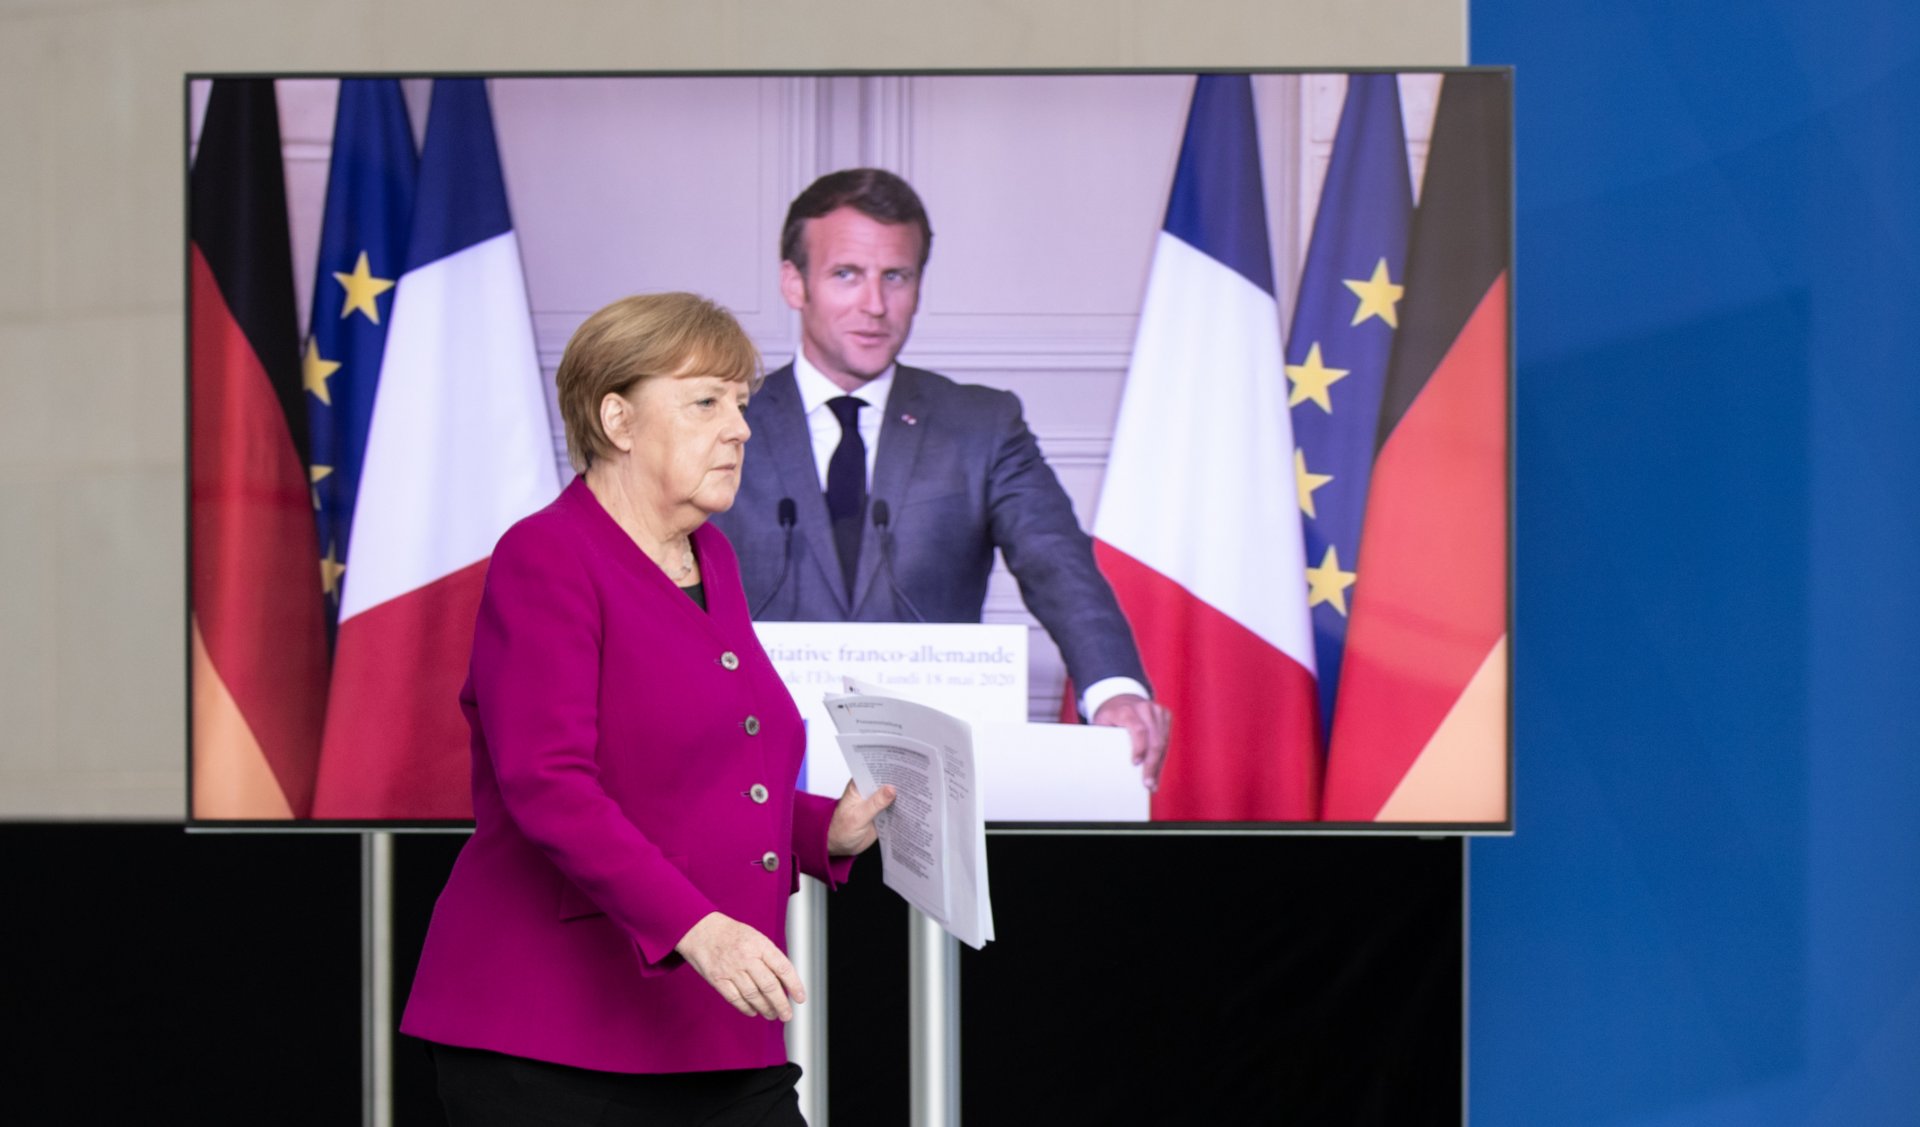 A Franco-German answer to Europe’s EUR 500 billion question